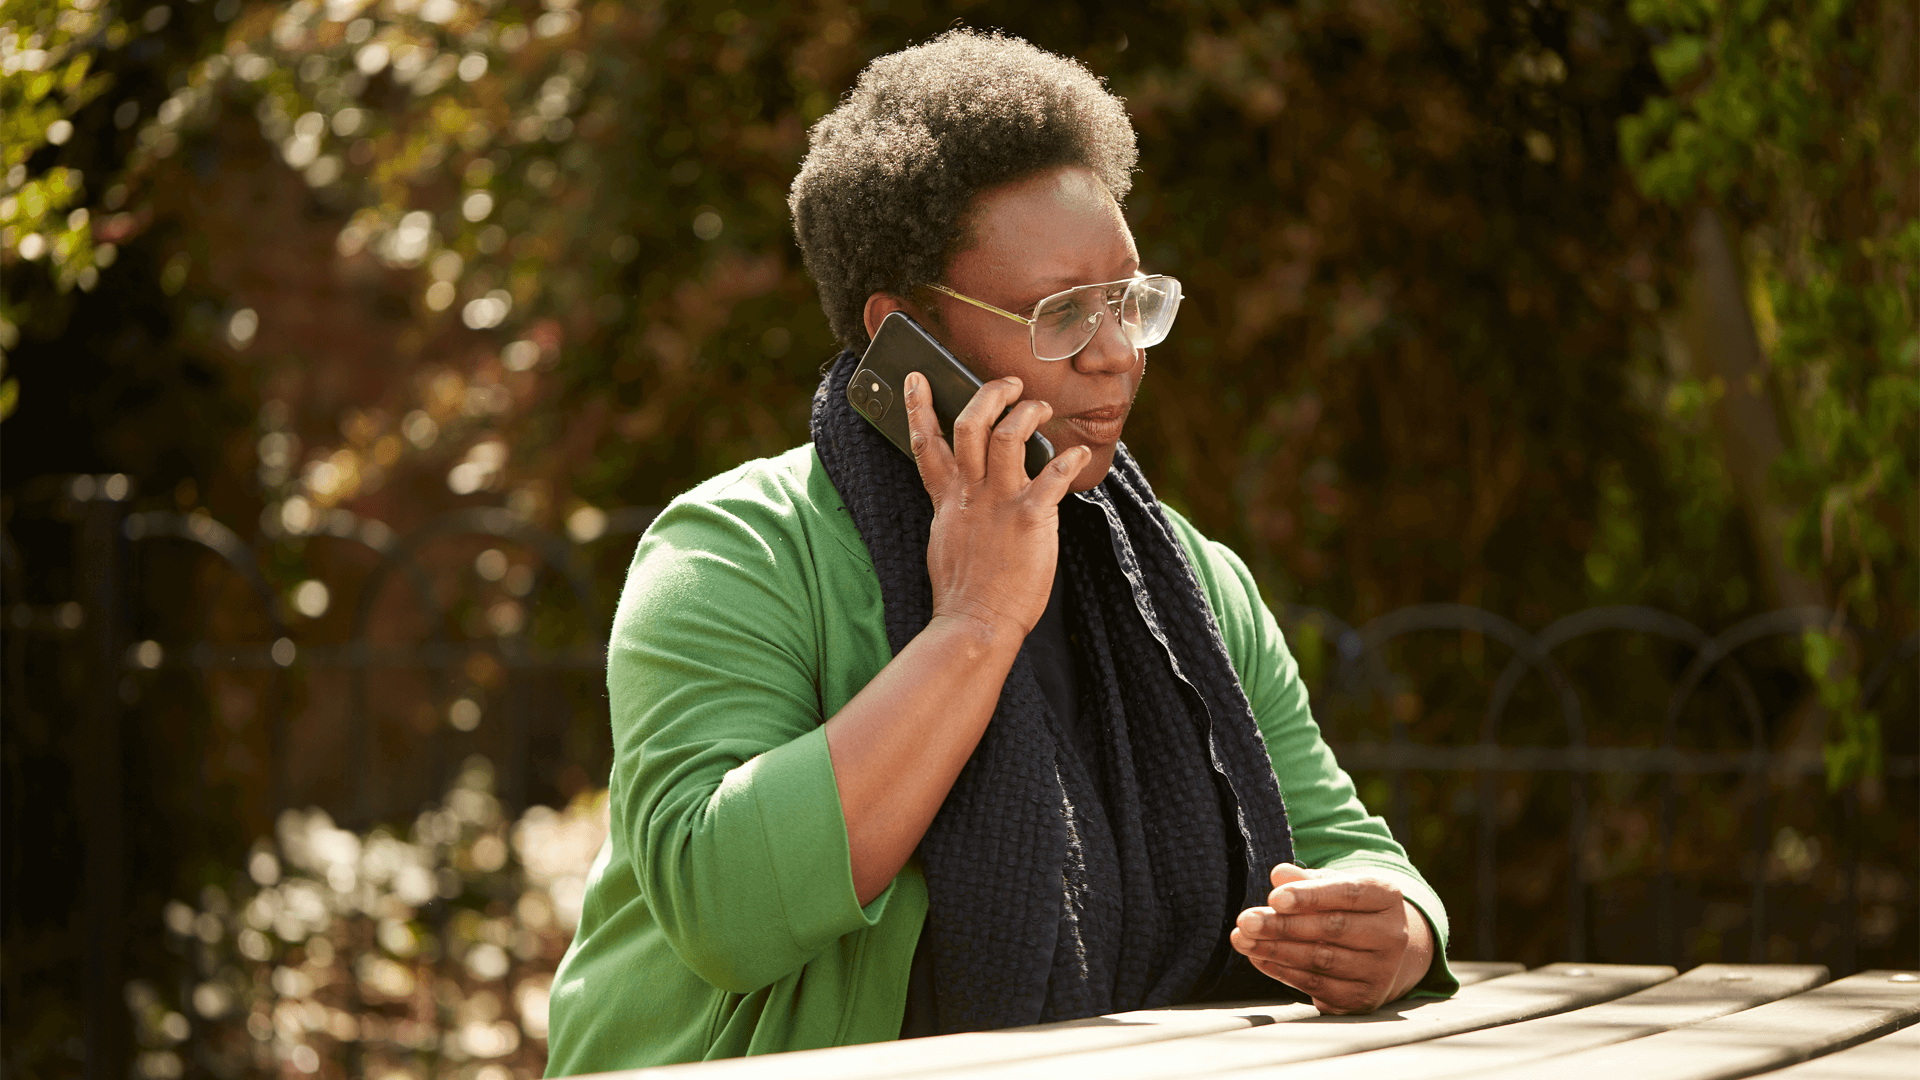 A lady speaking on her mobile phone at a picnic table